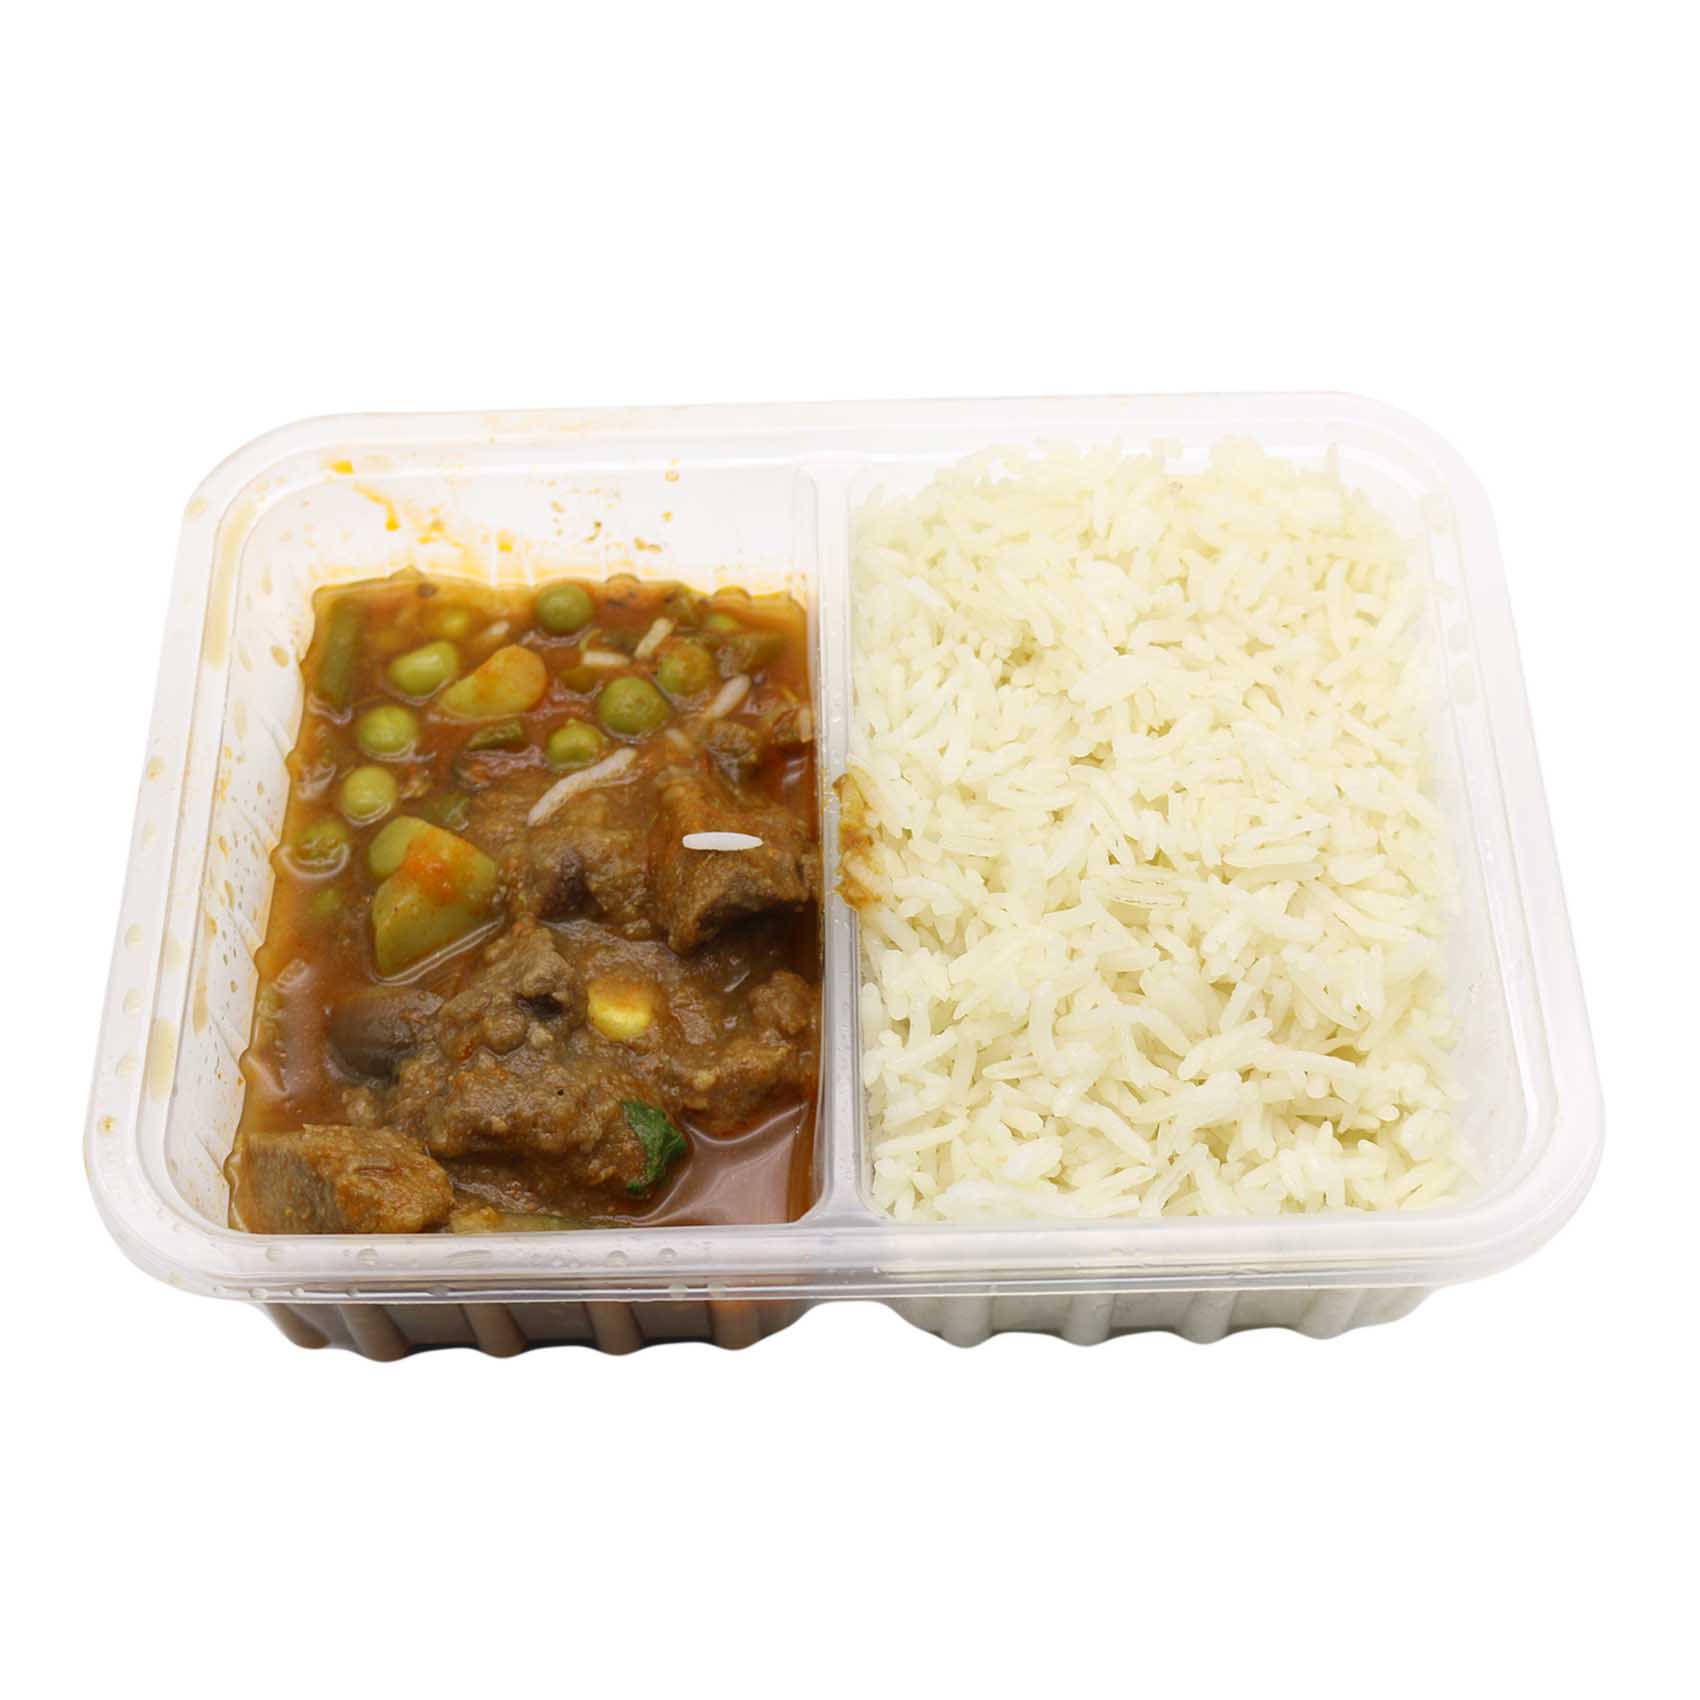 Beef Stew Rice And Mix Vegetables